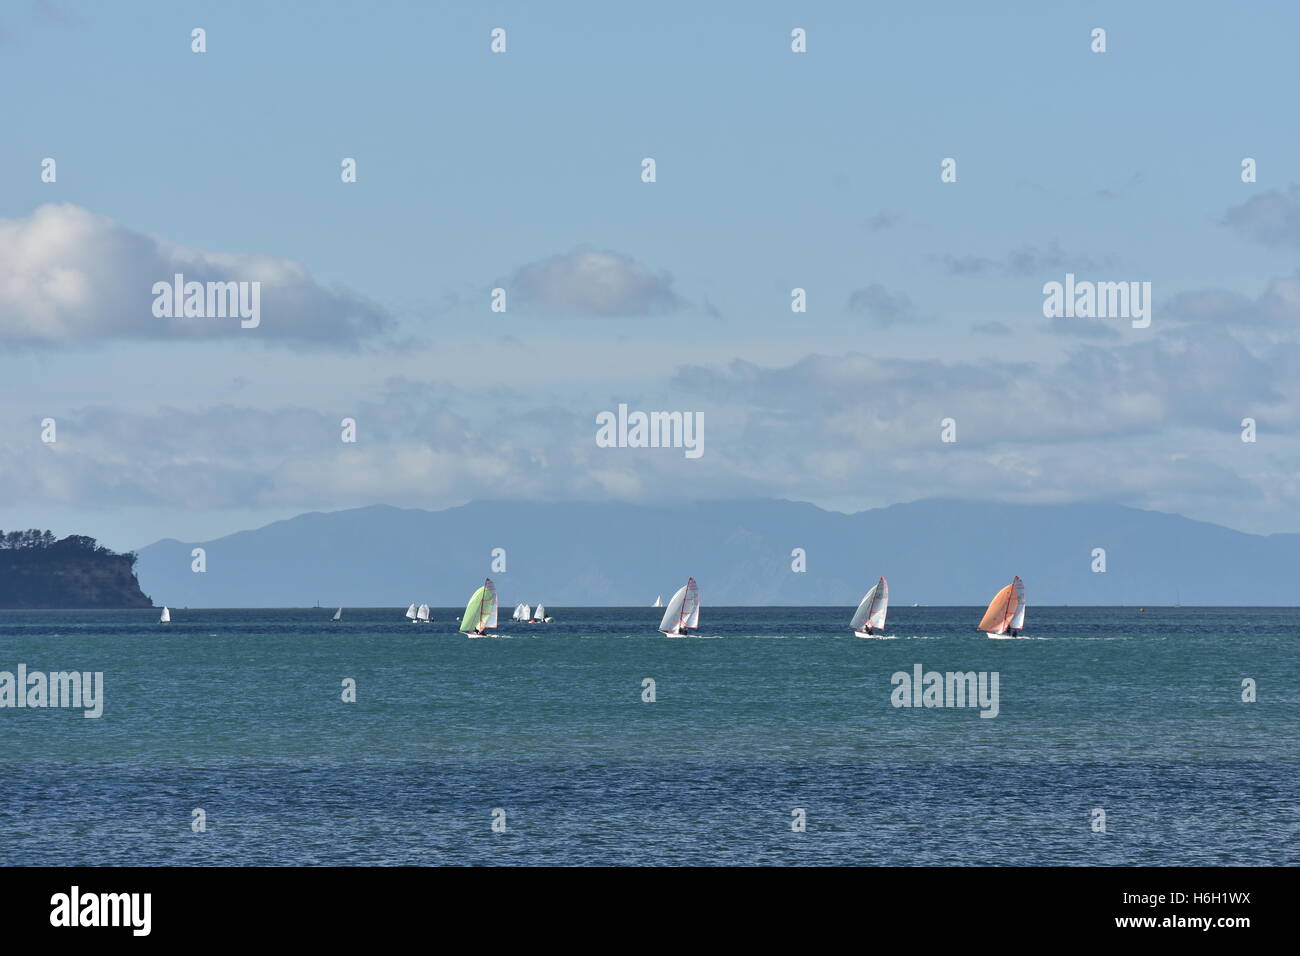 Sailboats with sails of various colours sailing on calm blue-green sea with big landmass in background. Stock Photo